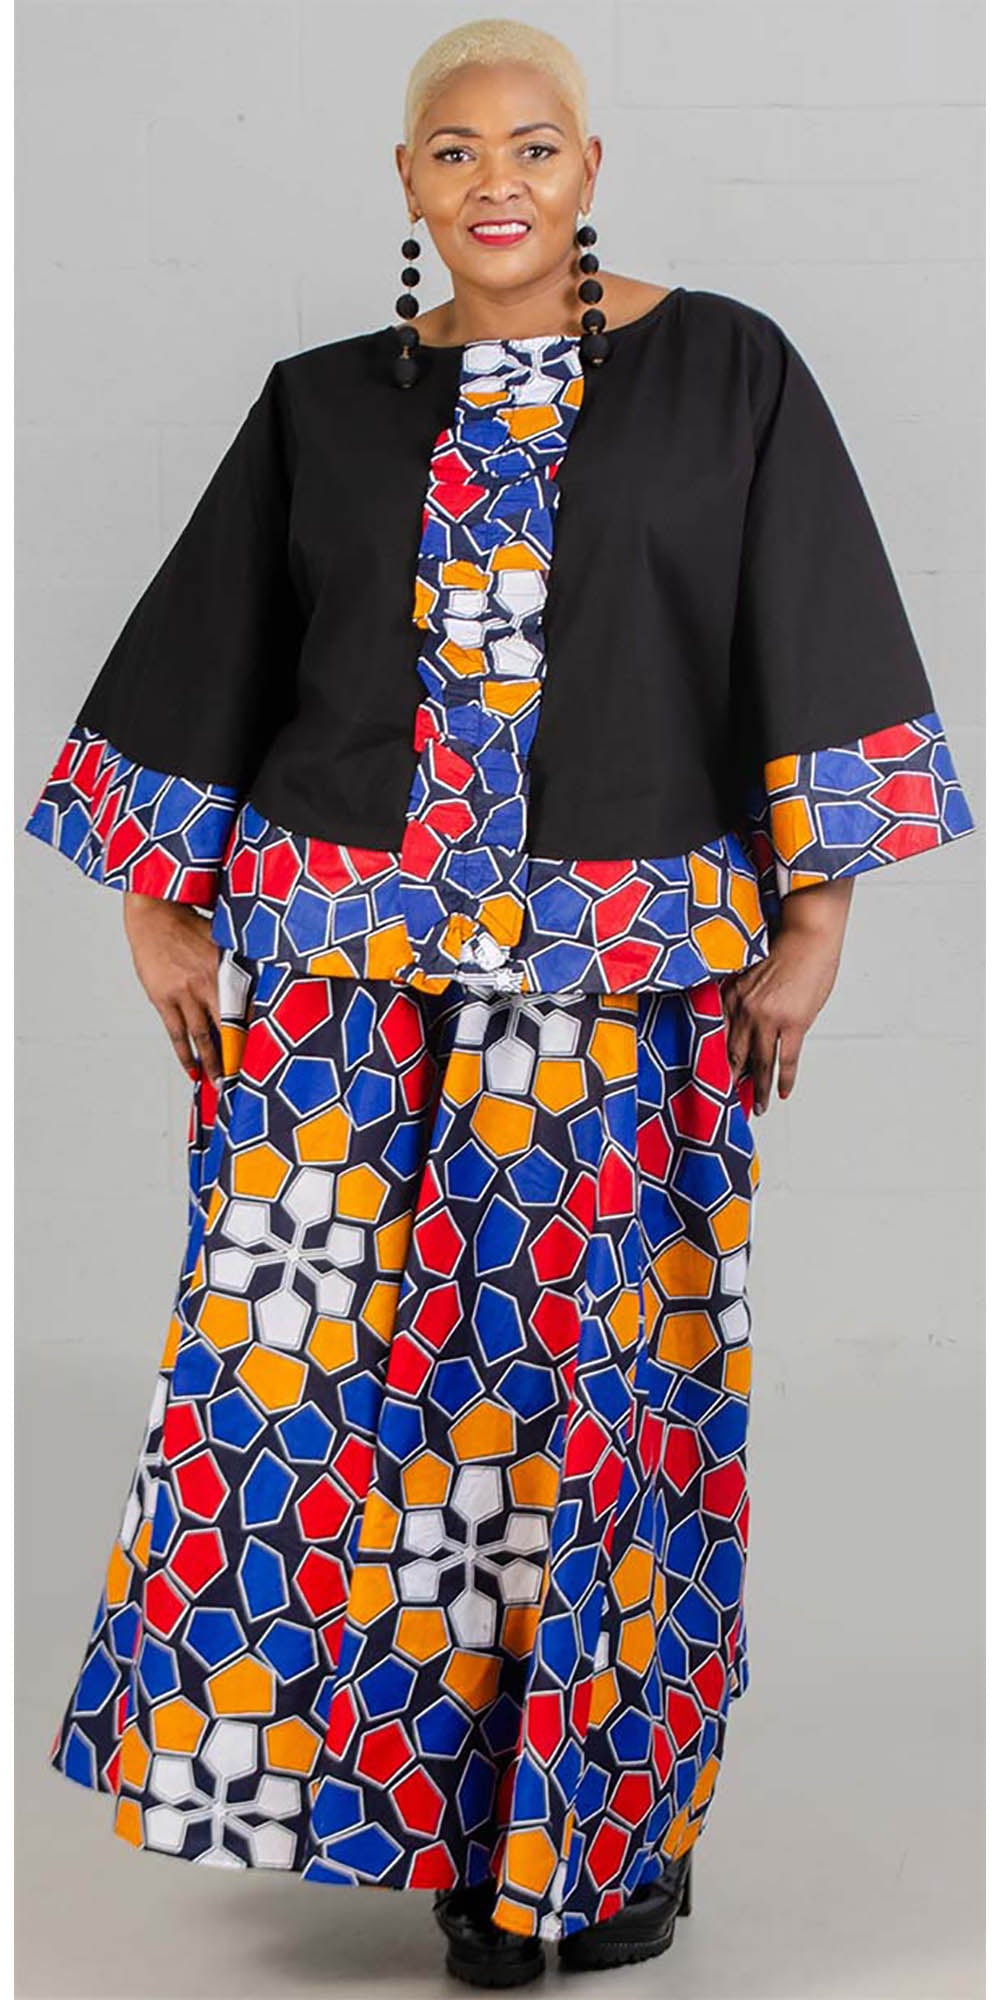 KaraChic 7558-RedBlueYellow - Womens Poncho Style Top With African Inspired Print Border